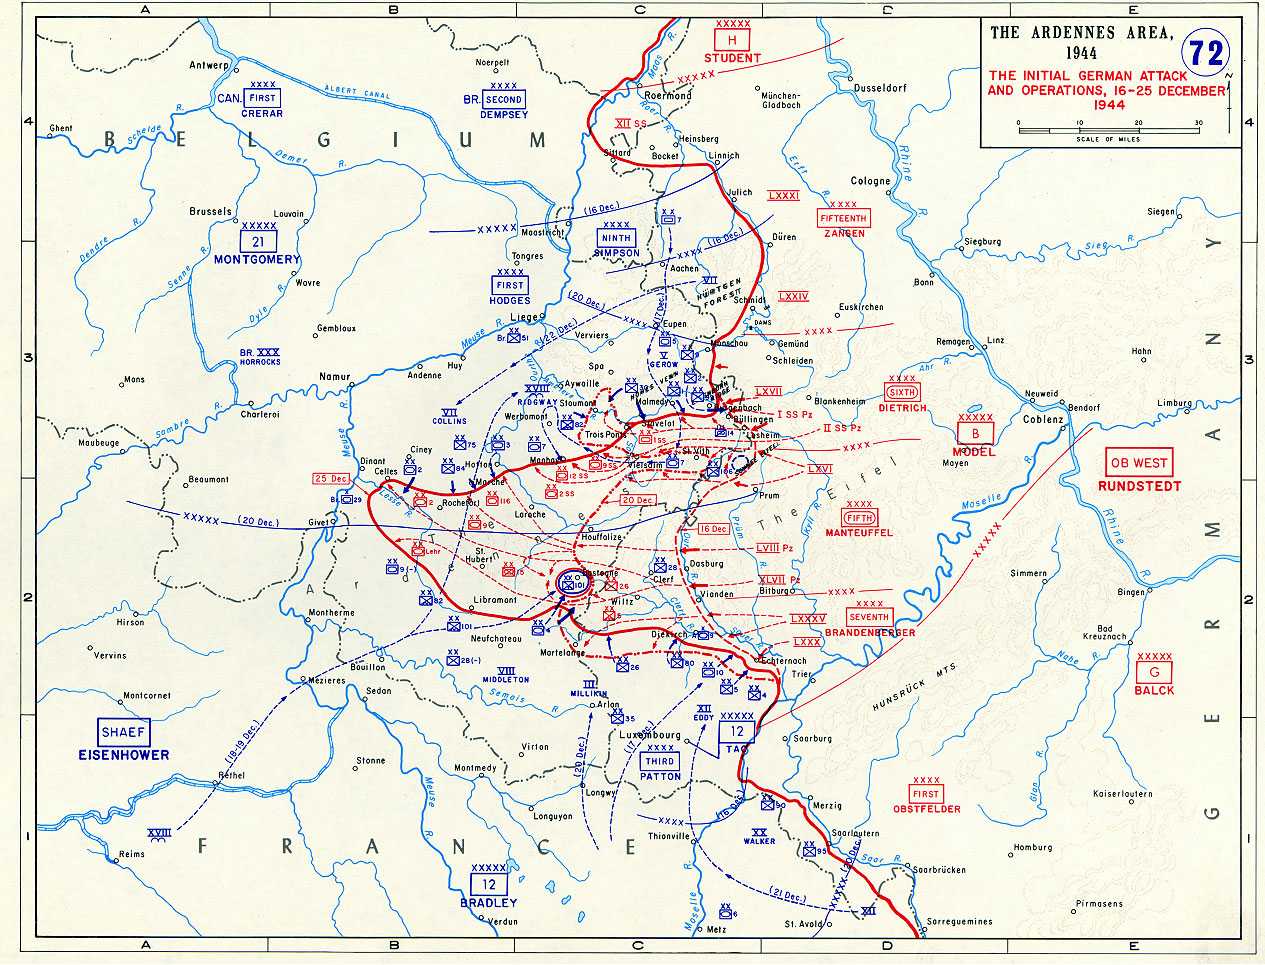 Battle map of the Battle of the Ardennes